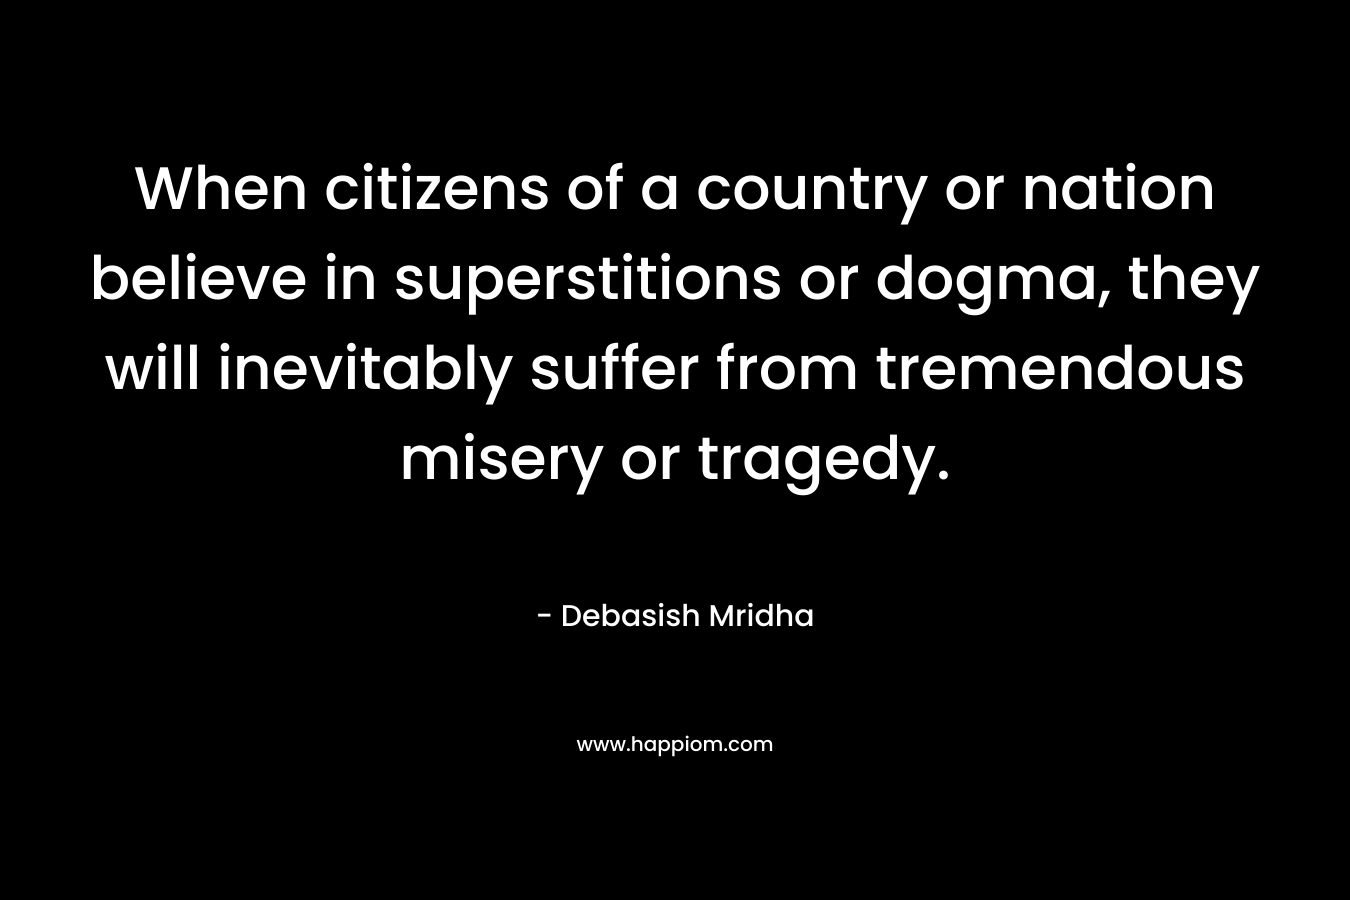 When citizens of a country or nation believe in superstitions or dogma, they will inevitably suffer from tremendous misery or tragedy.